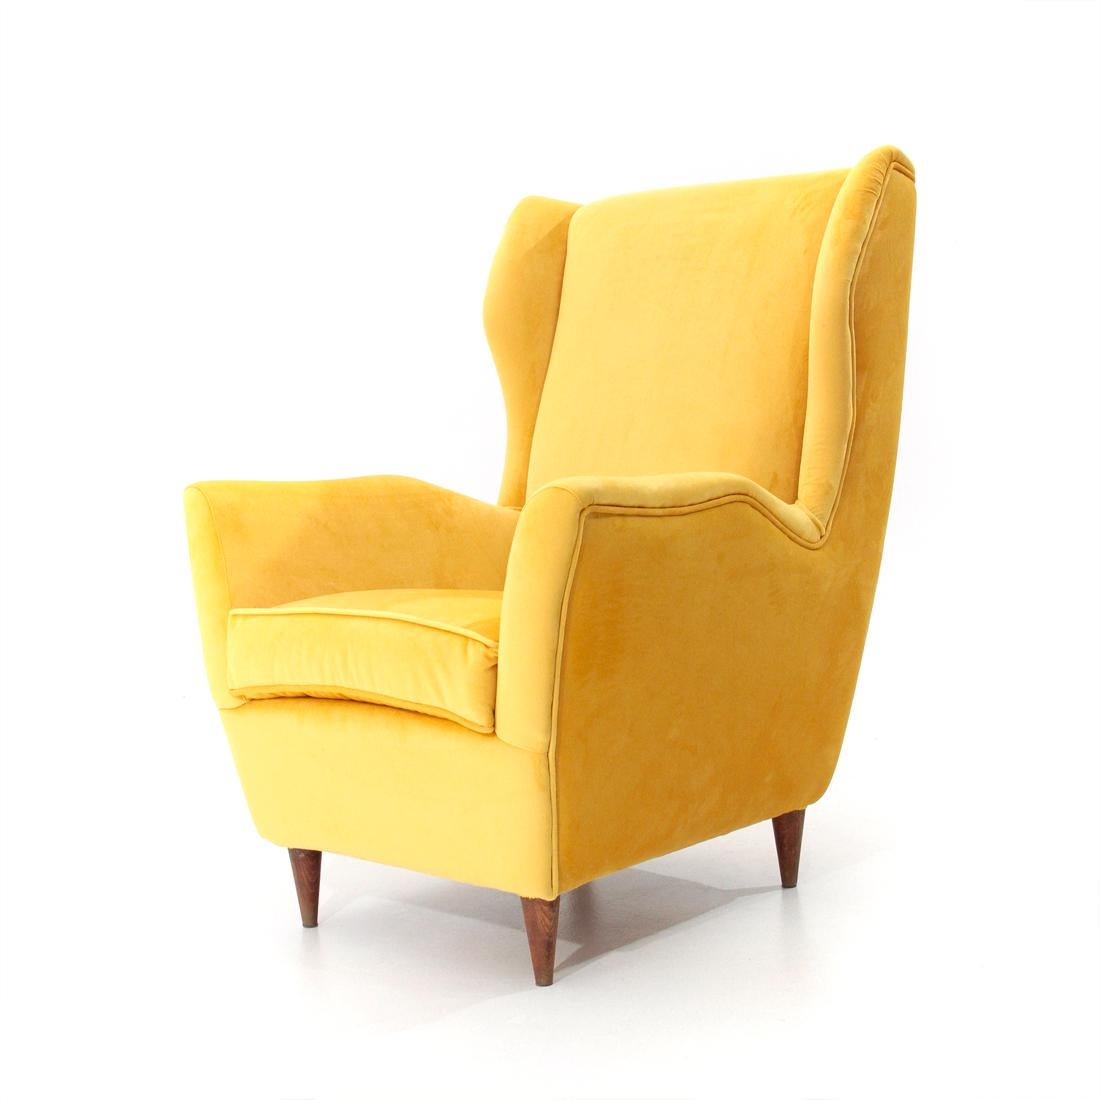 Italian manufacture armchair produced in the 1950s.
Wooden structure padded and lined with new yellow velvet fabric.
Legs in turned conical wood.
Good general conditions, some signs due to normal use over time.

Dimensions: Length 73 cm, depth